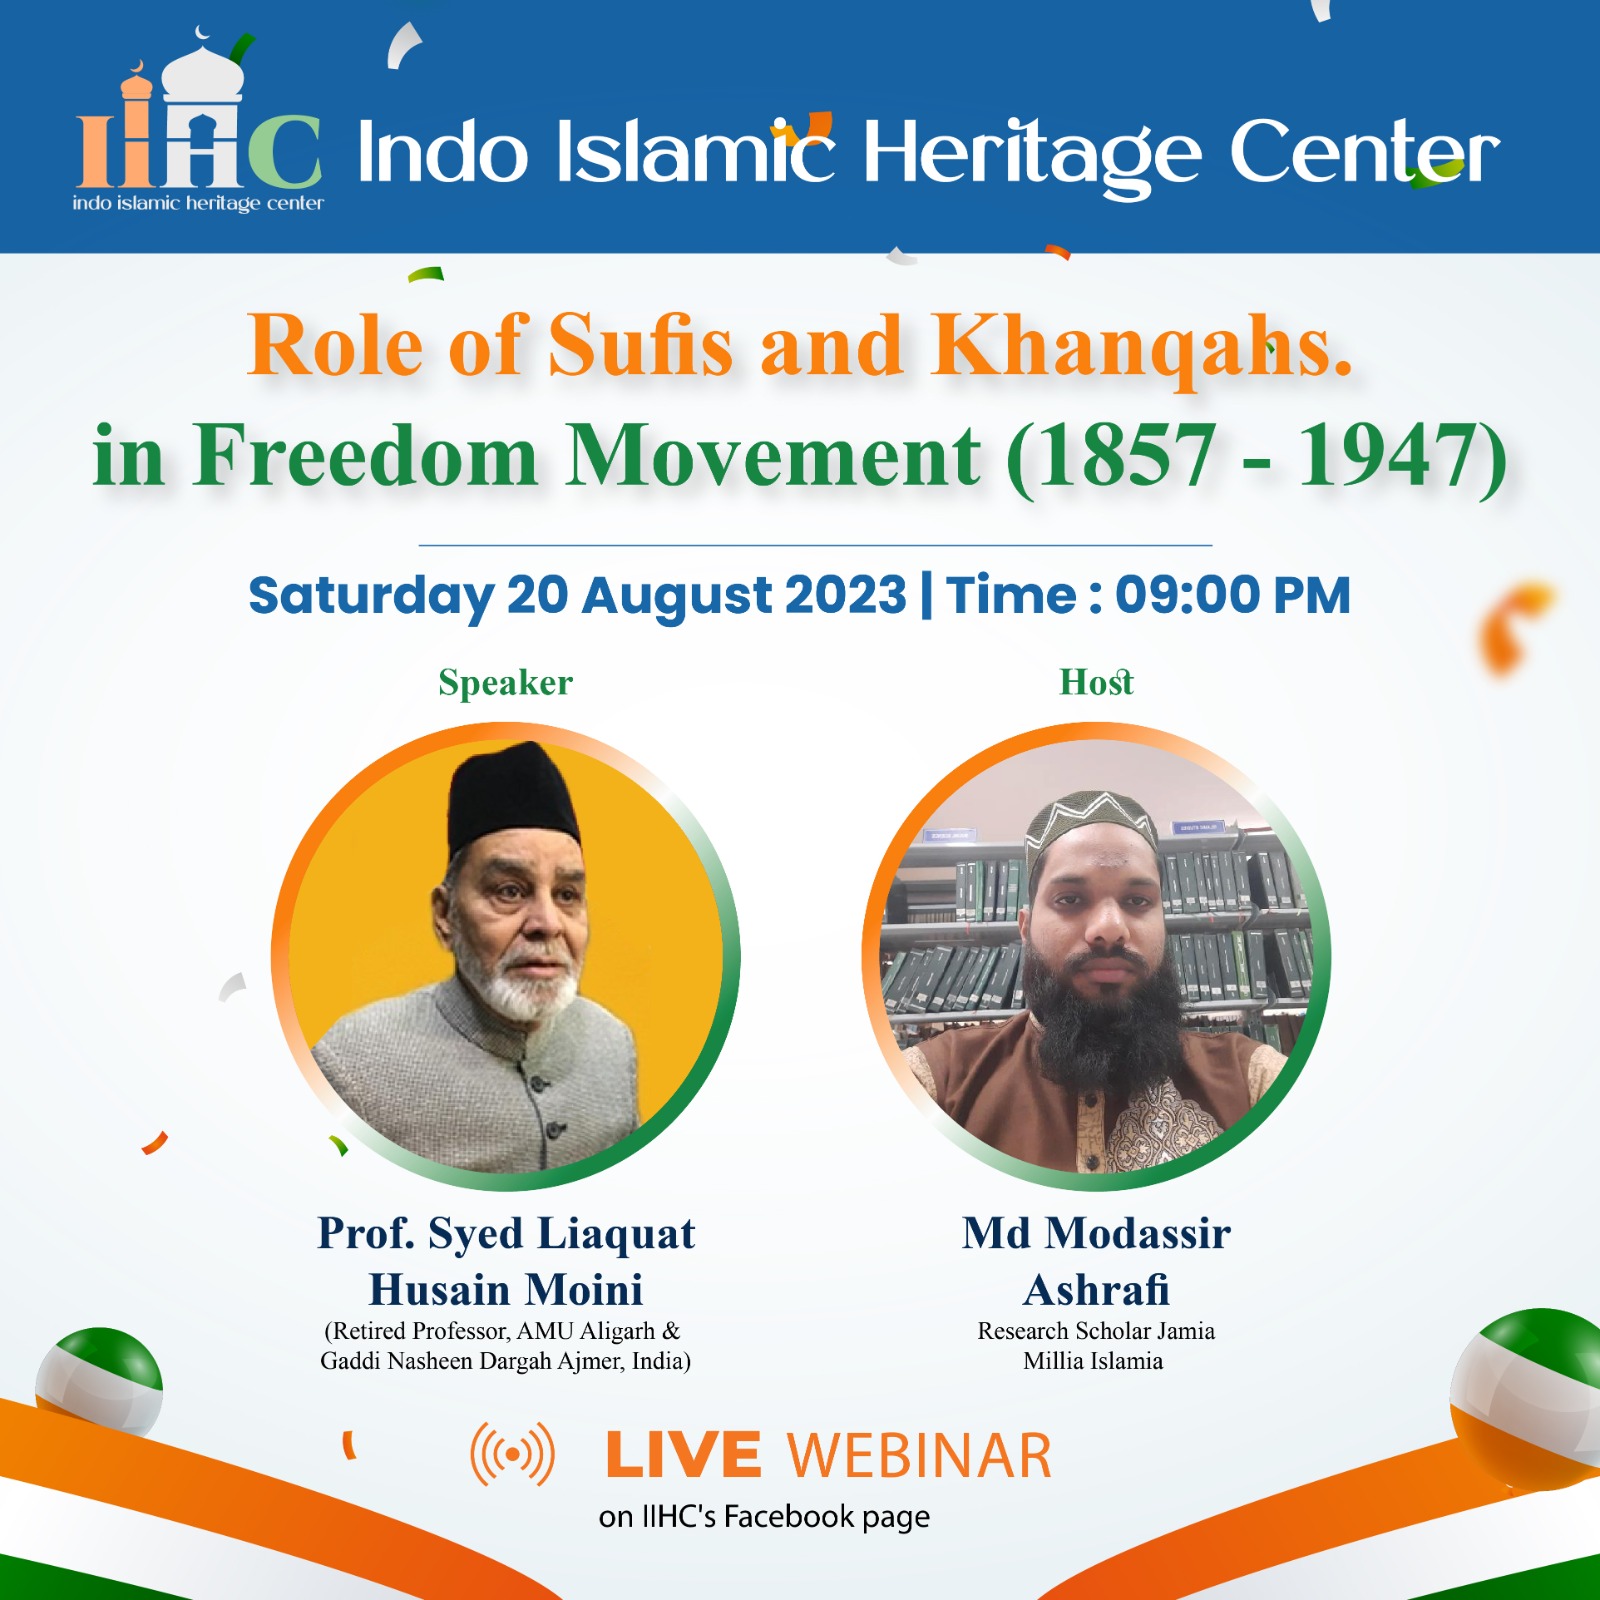 Webinar on  “Role of Sufis and Khanqahs in Freedom Movement (1857-1947)”